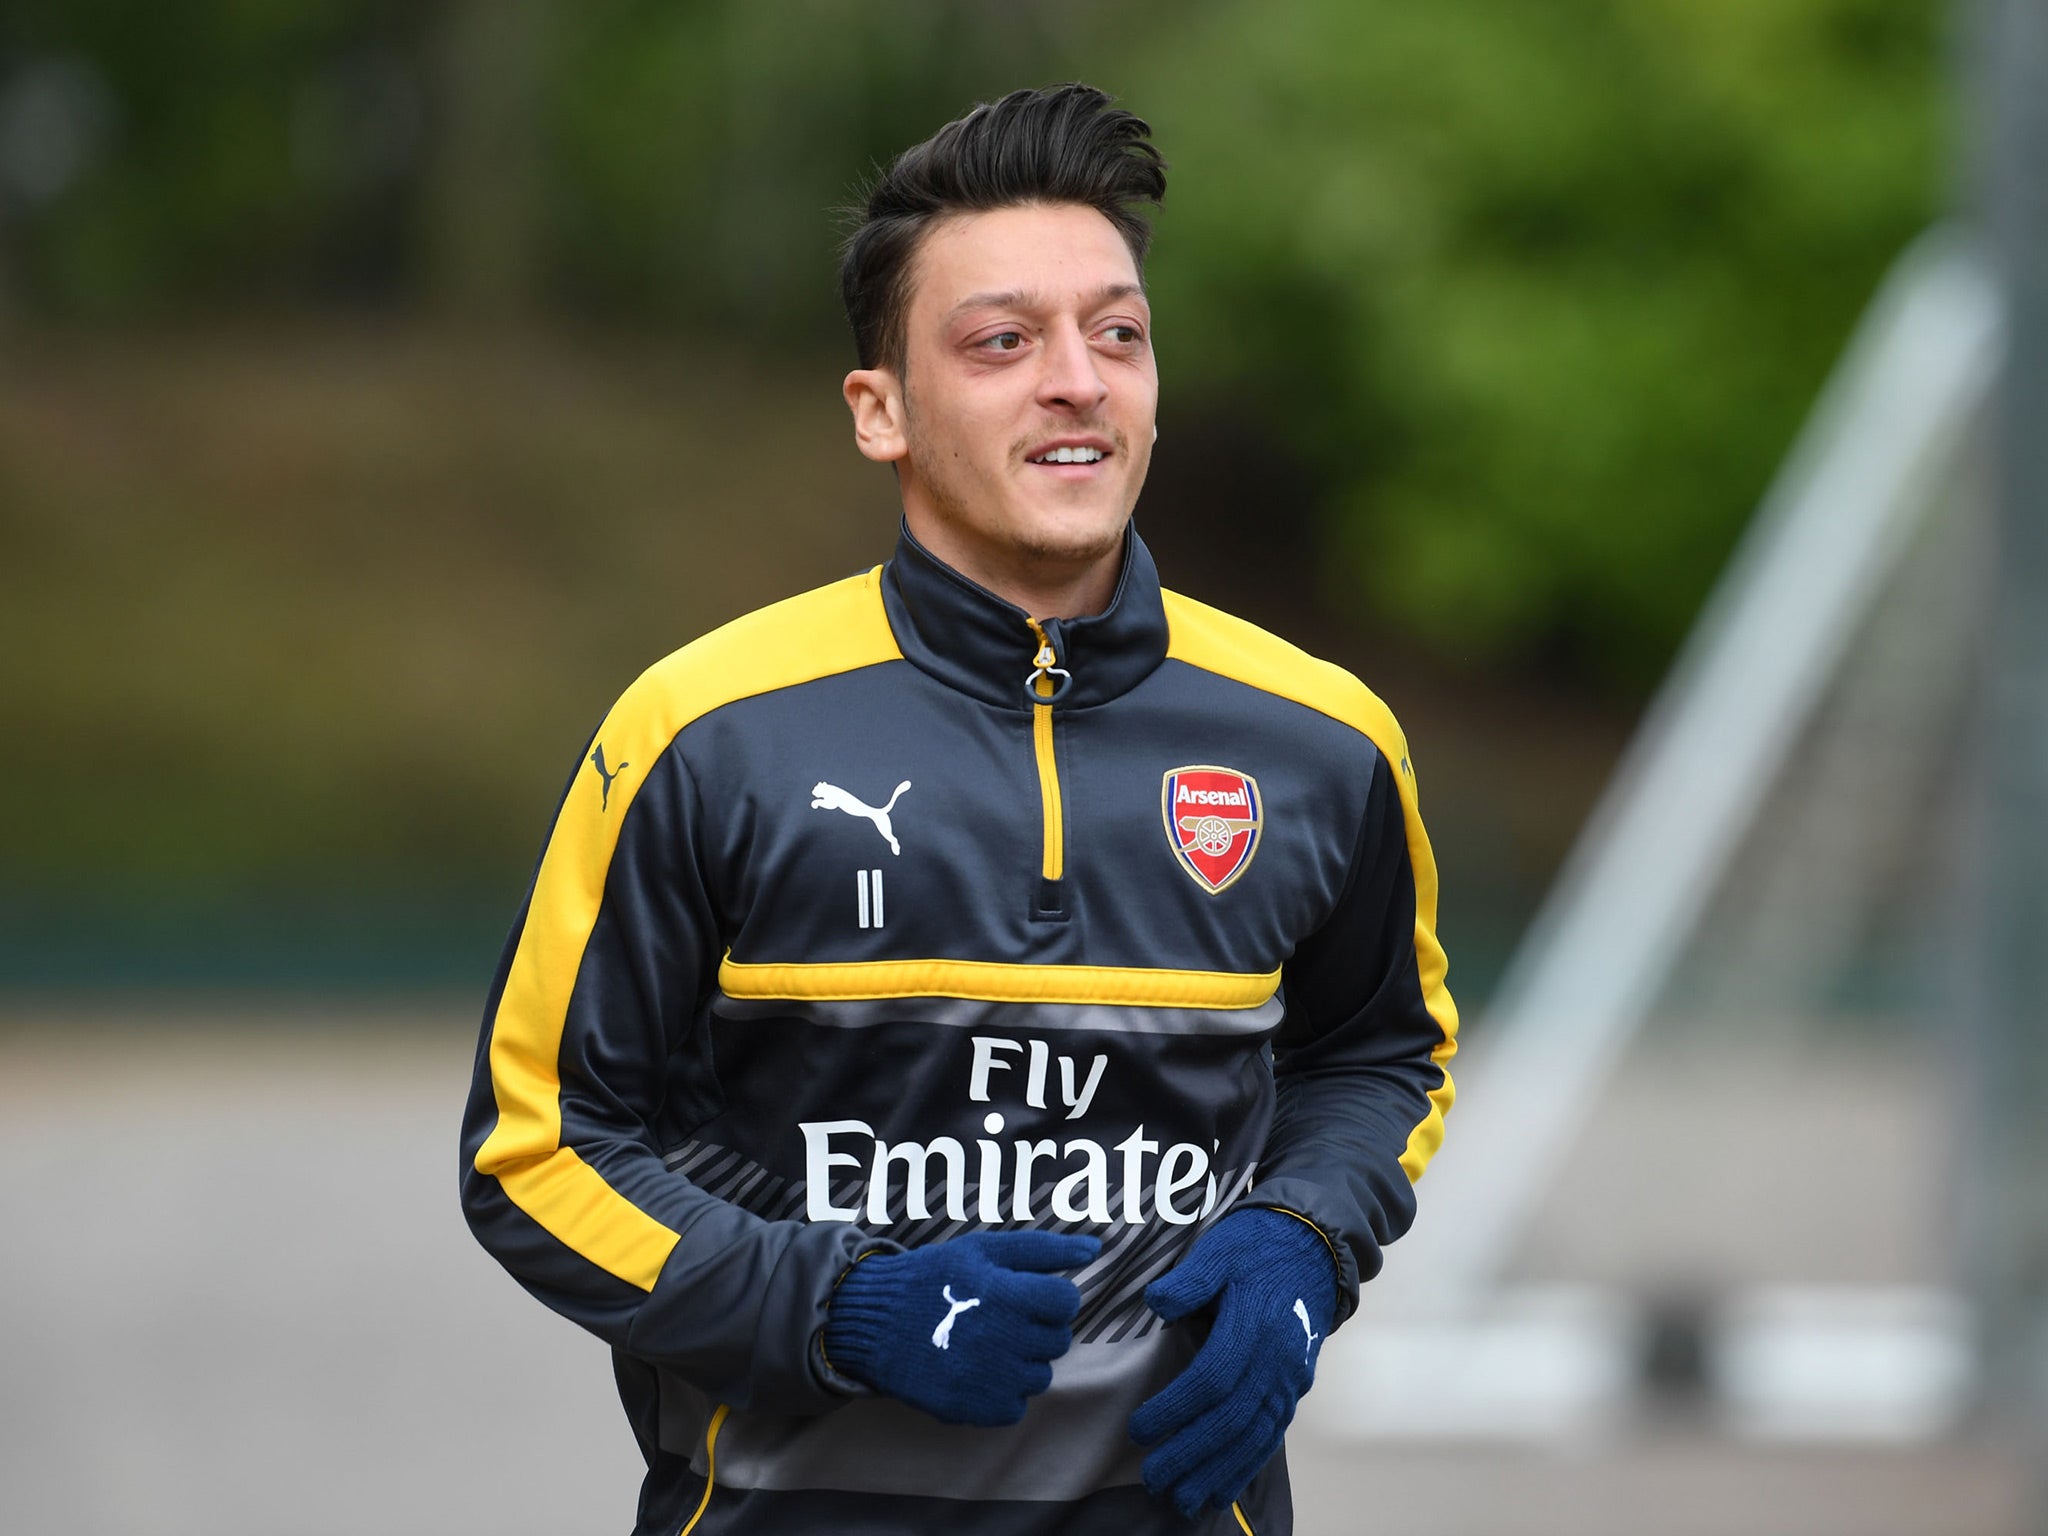 Mesut Ozil feels that is regularly made a scapegoat for Arsenal's poor displays